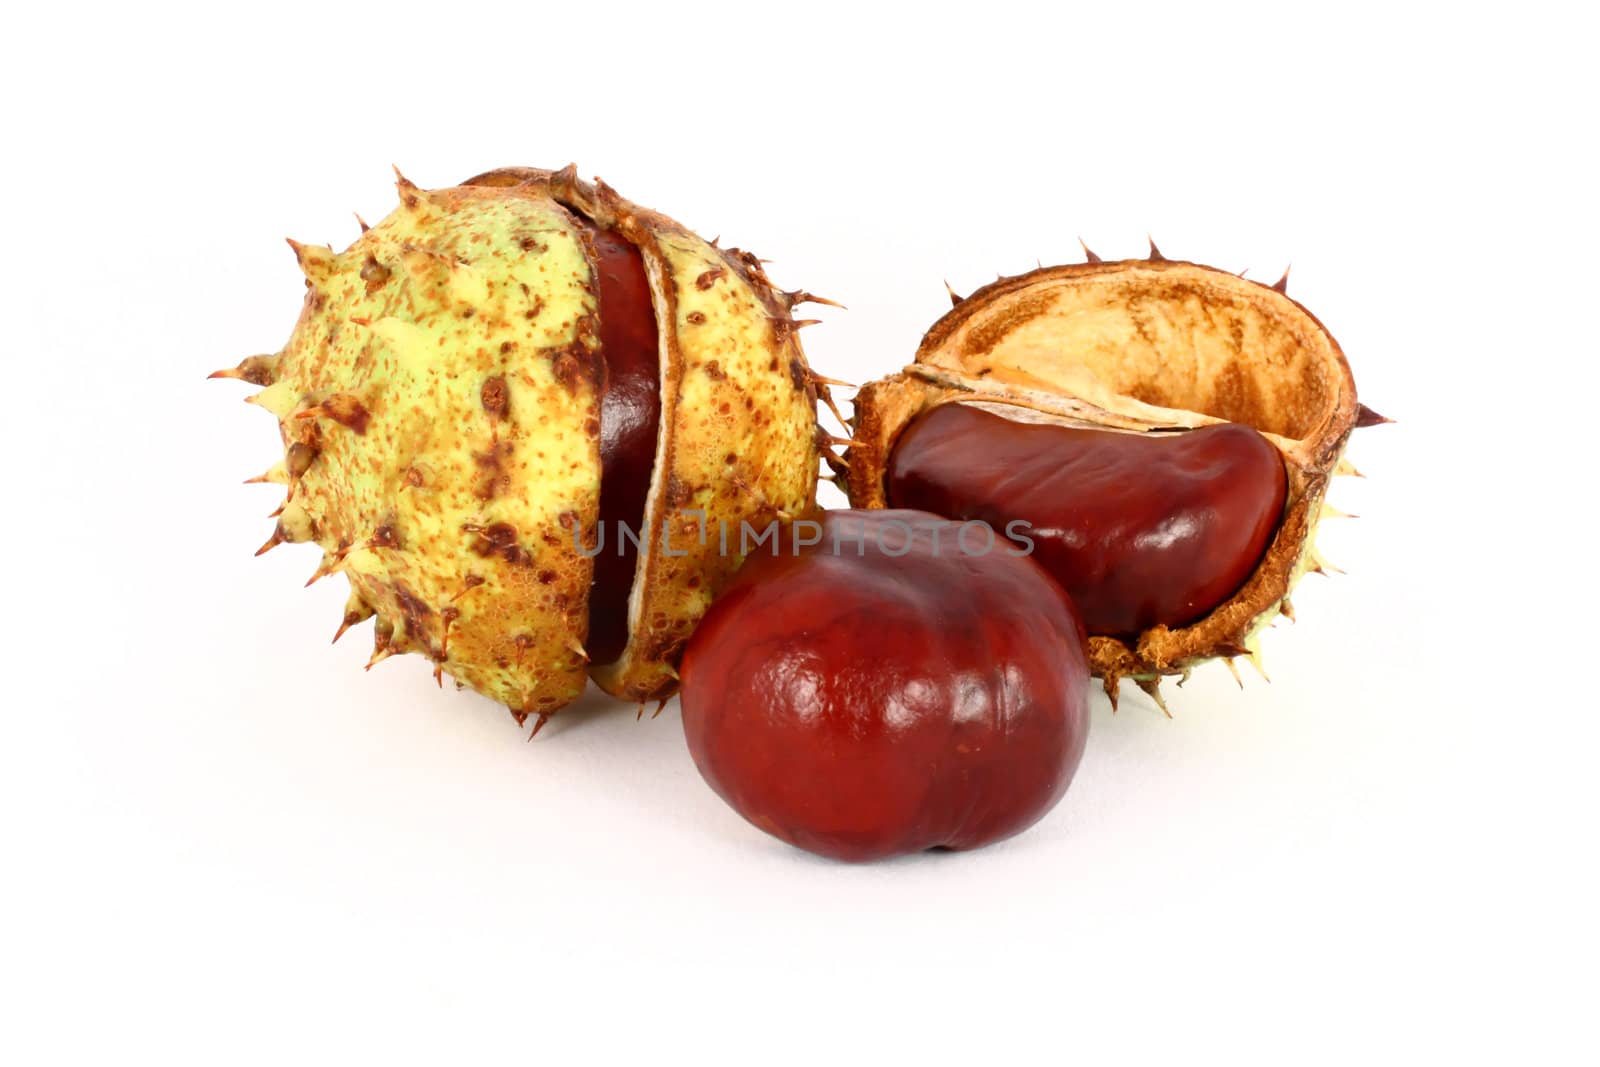 Wild chestnut in shells, gifts from autumn, isolated